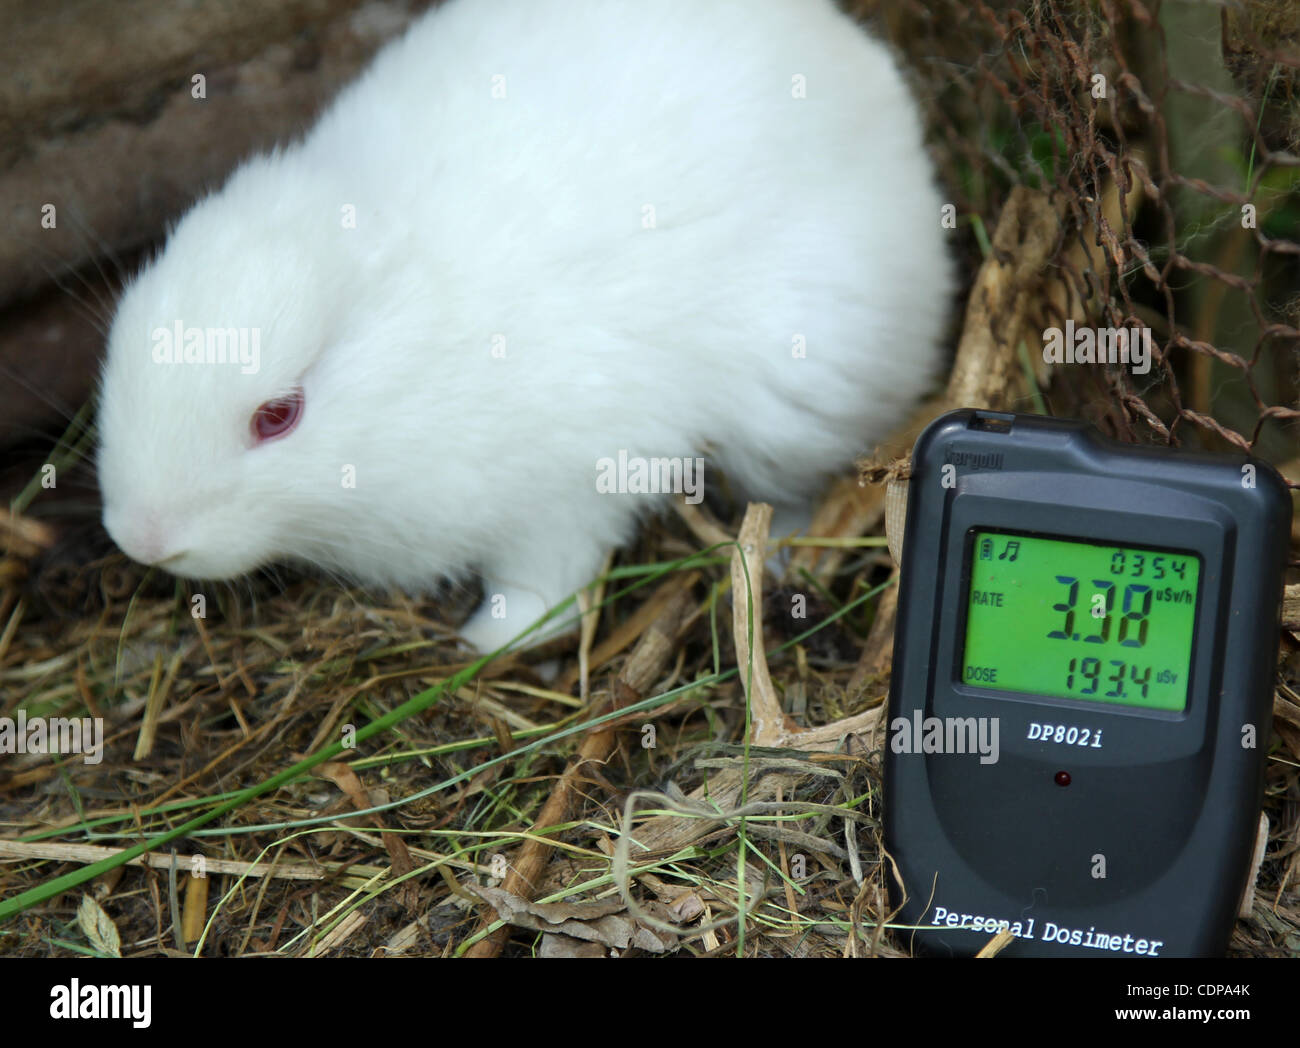 June 4, 2011 - Fukushima, Japan - A new-born rabbit without ears is seen in Namie City which is located just outside the 30km exclusion zone of the Fukushima Daiichi nuclear power station in Fukushima Prefecture, Japan. The owner of the rabbit Yuko Sugimoto, 56-year-old, found the rabbit born withou Stock Photo